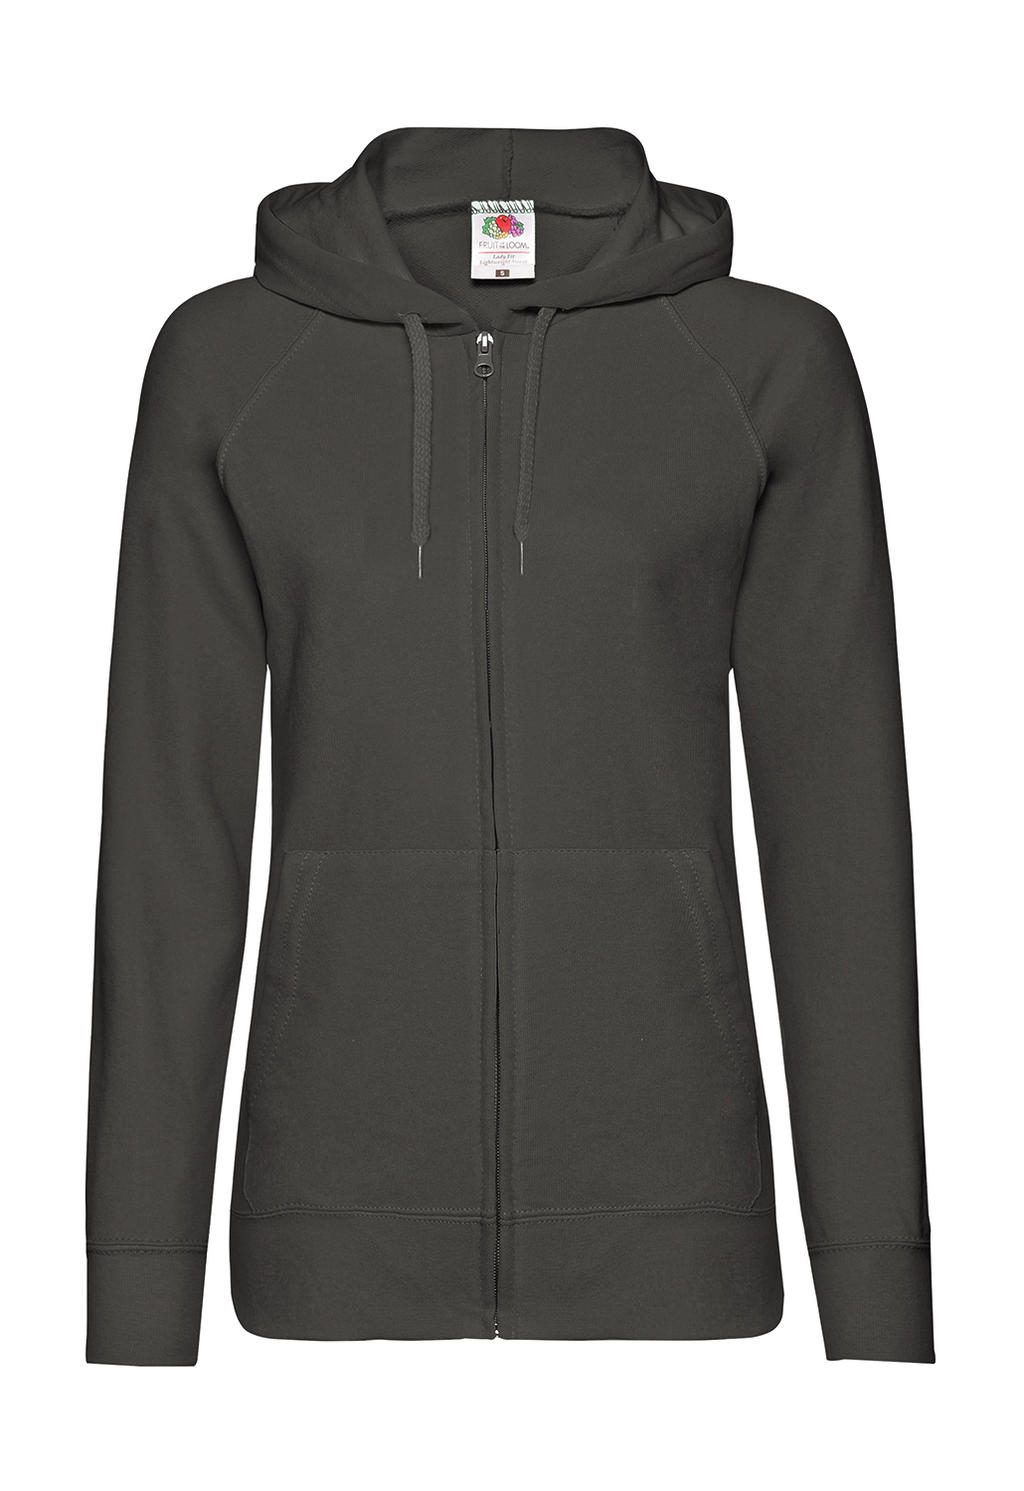  Ladies Lightweight Hooded Sweat Jacket in Farbe Light Graphite